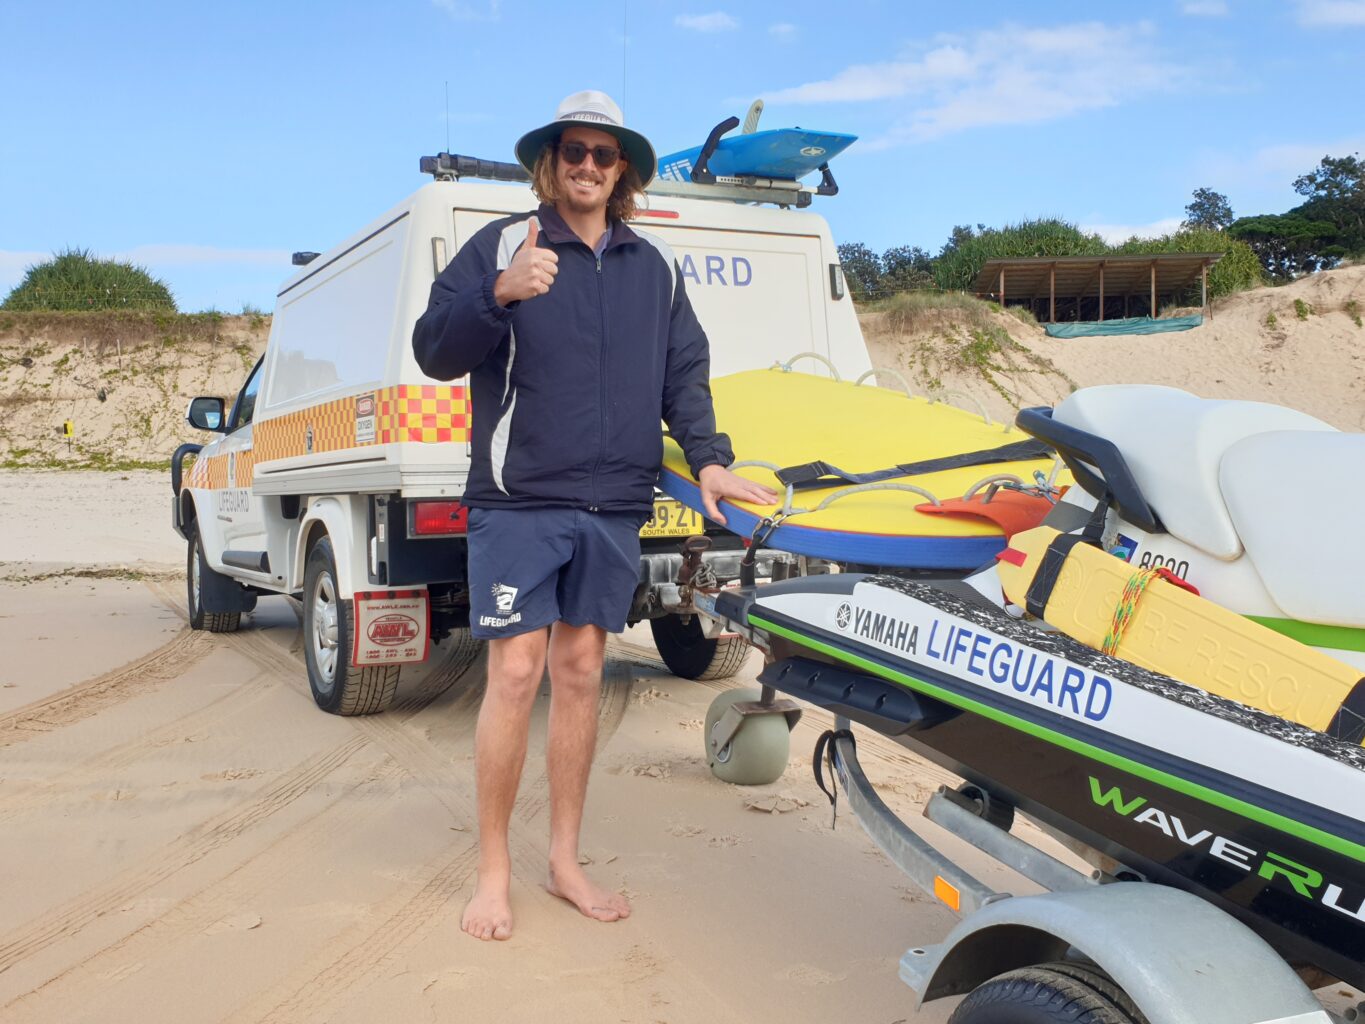 Make sure you say hello to Daley if you see him keeping our beaches safe